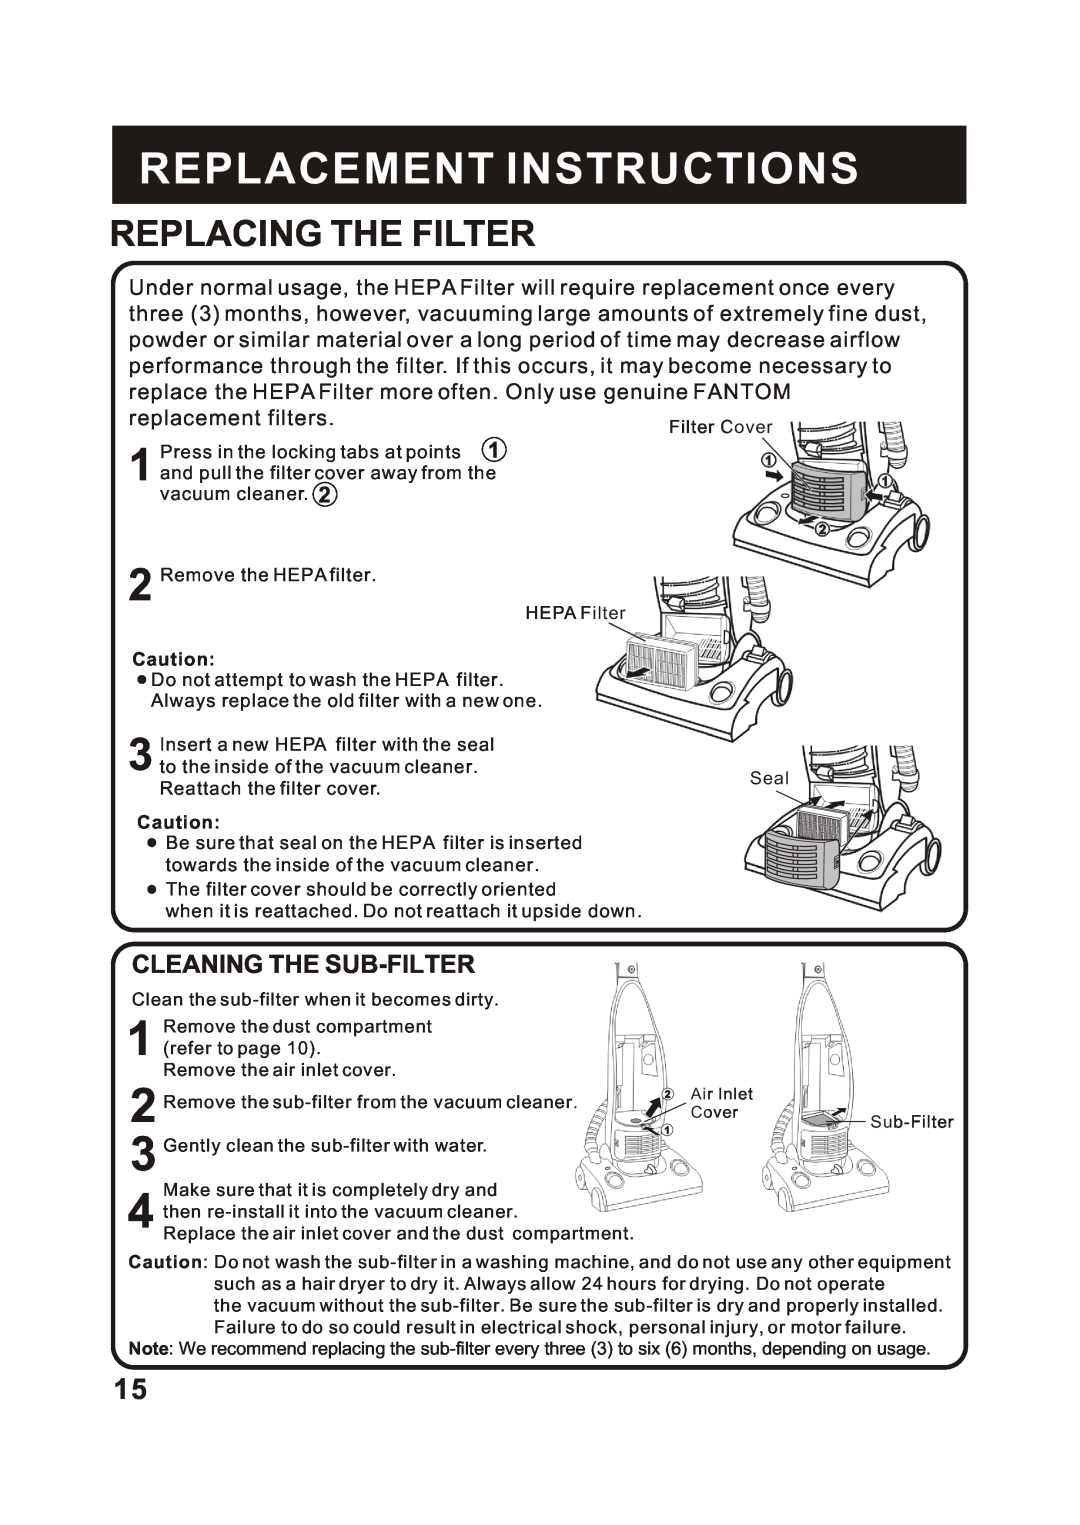 Fantom Vacuum FC285H instruction manual Replacing The Filter, Cleaning The Sub-Filter, Replacement Instructions 